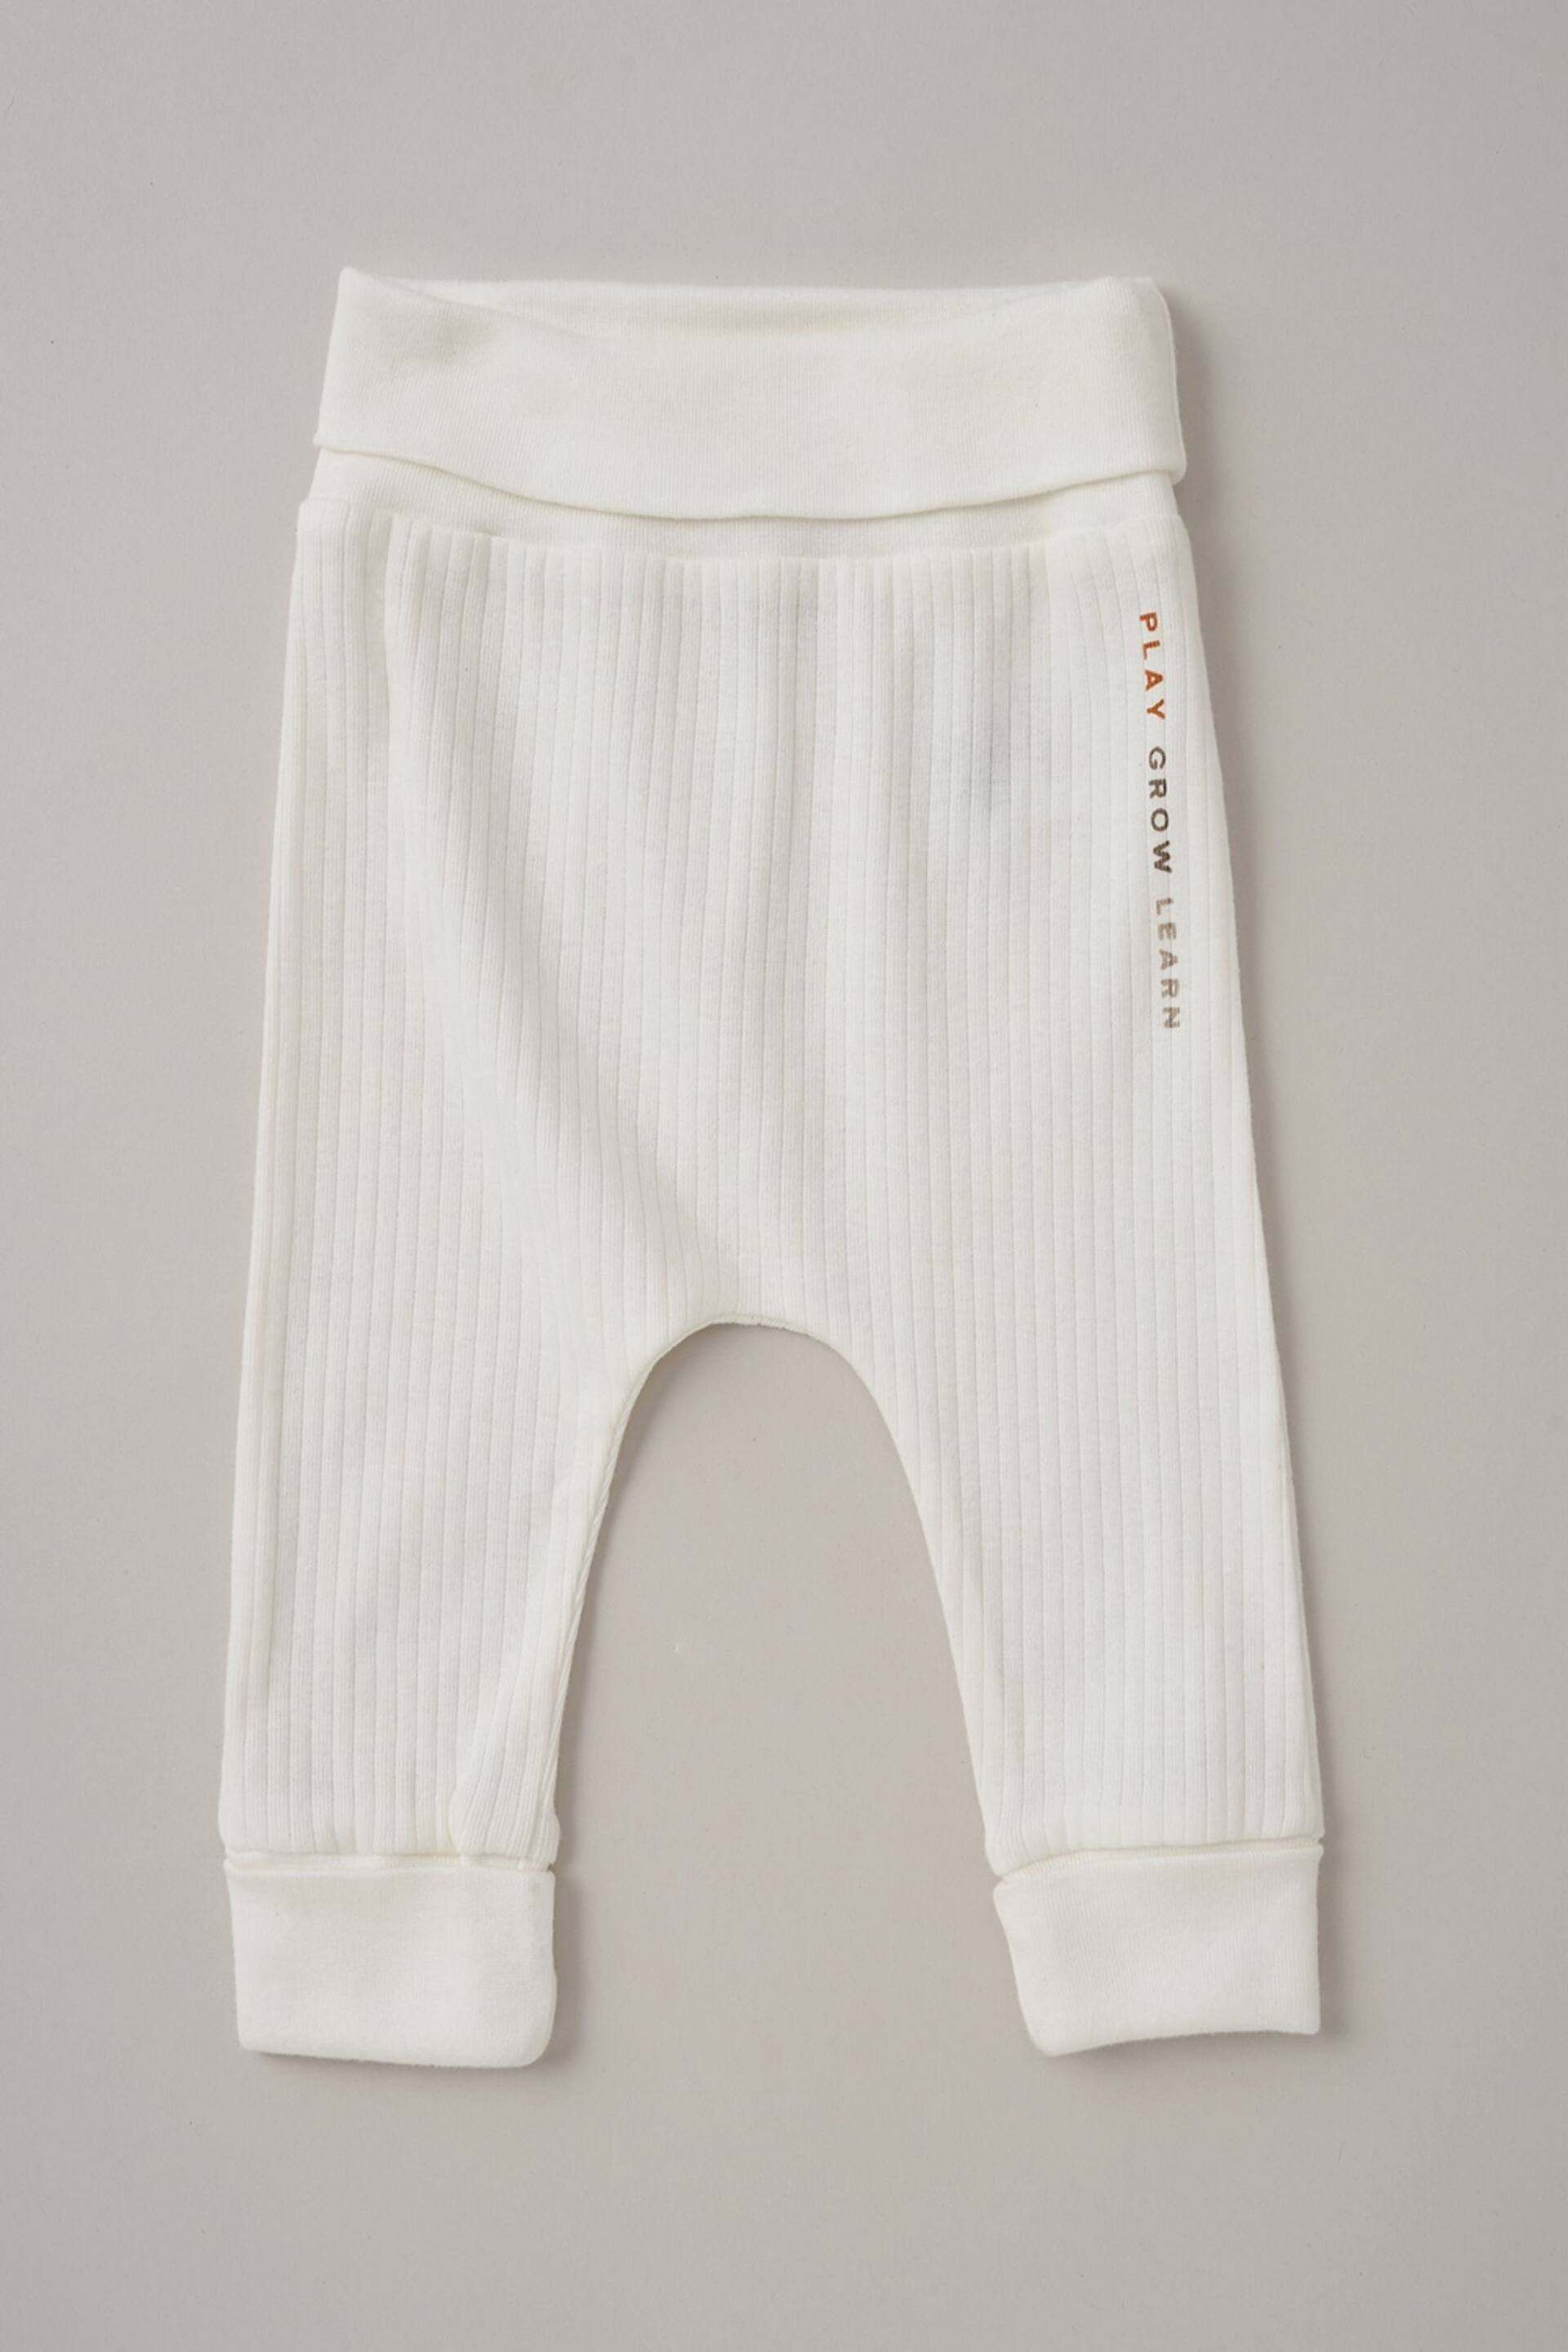 Homegrown White Cotton Bodysuit, Trouser and Bibs Set - Image 3 of 5